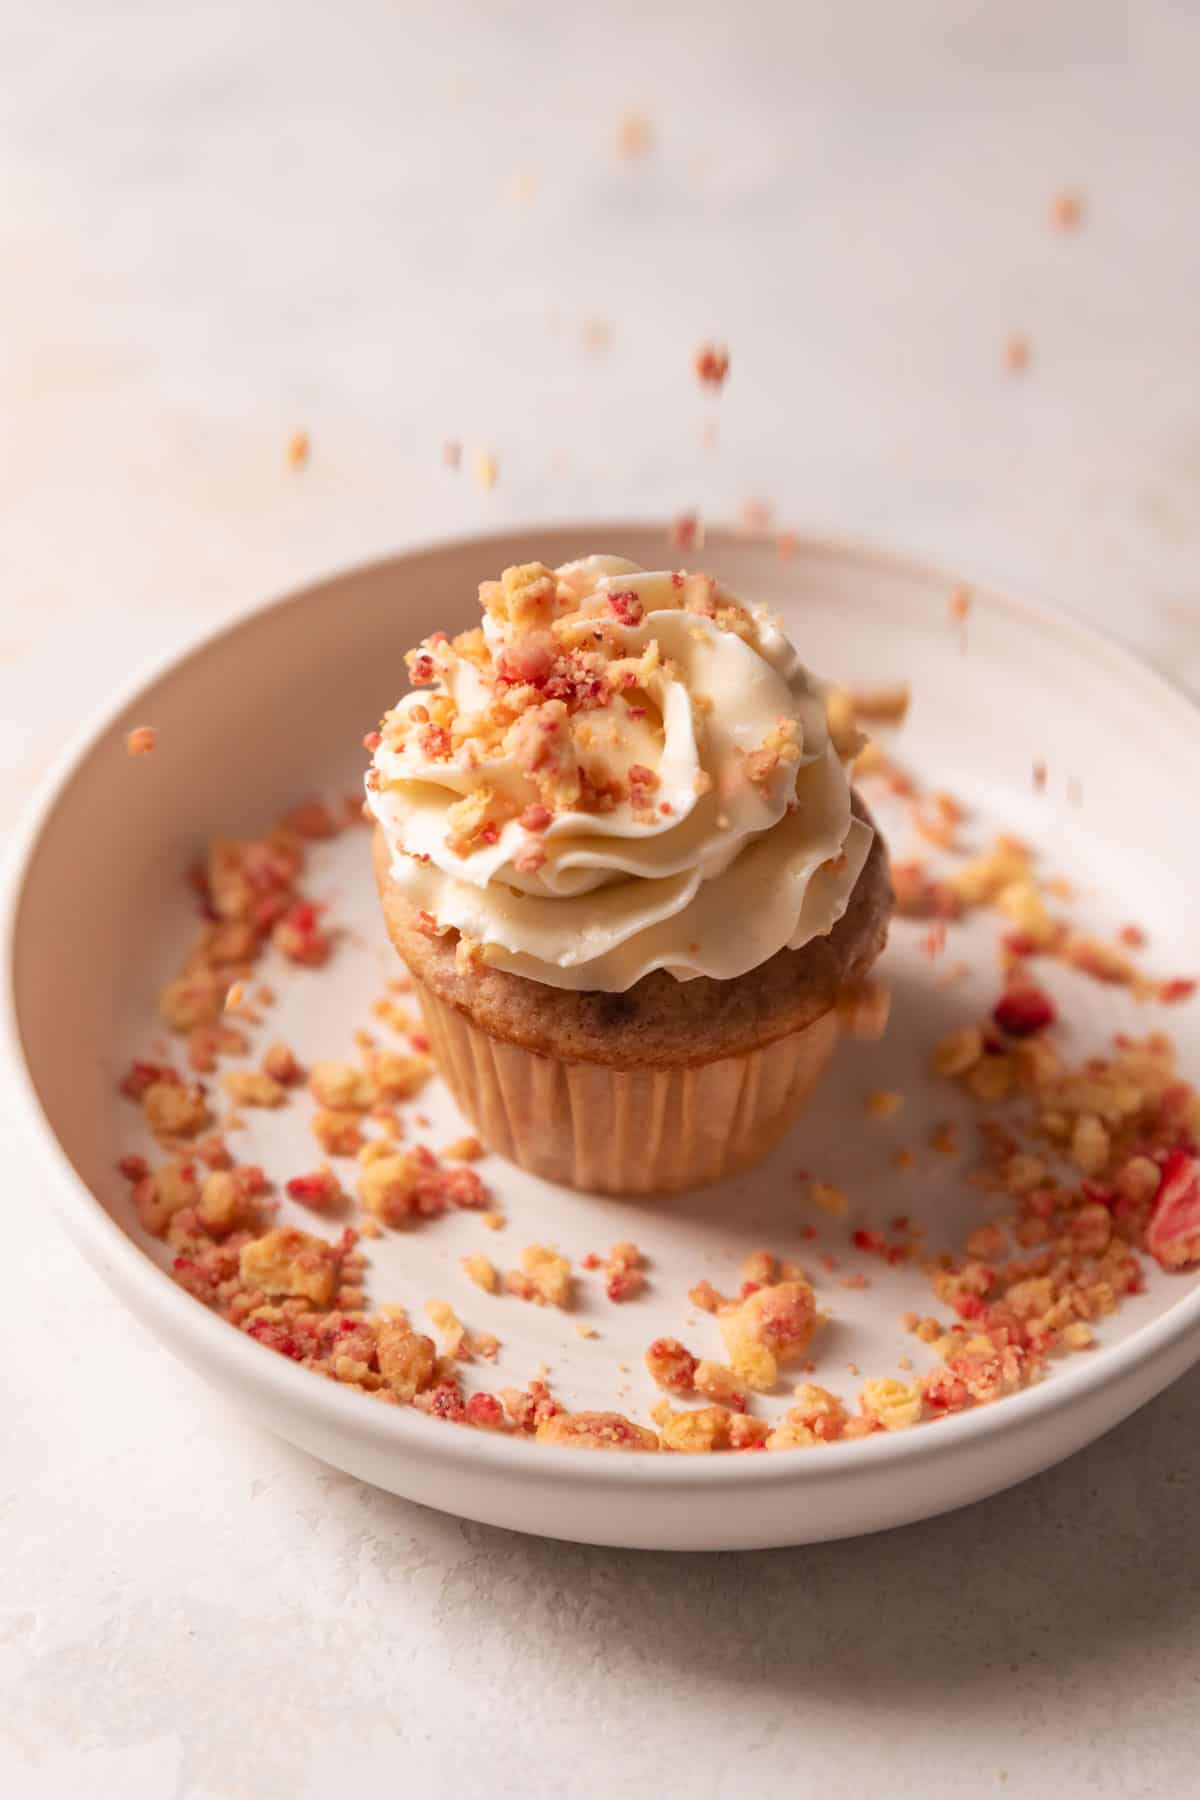 sprinkling the top of a cupcake with strawberry crunch topping.